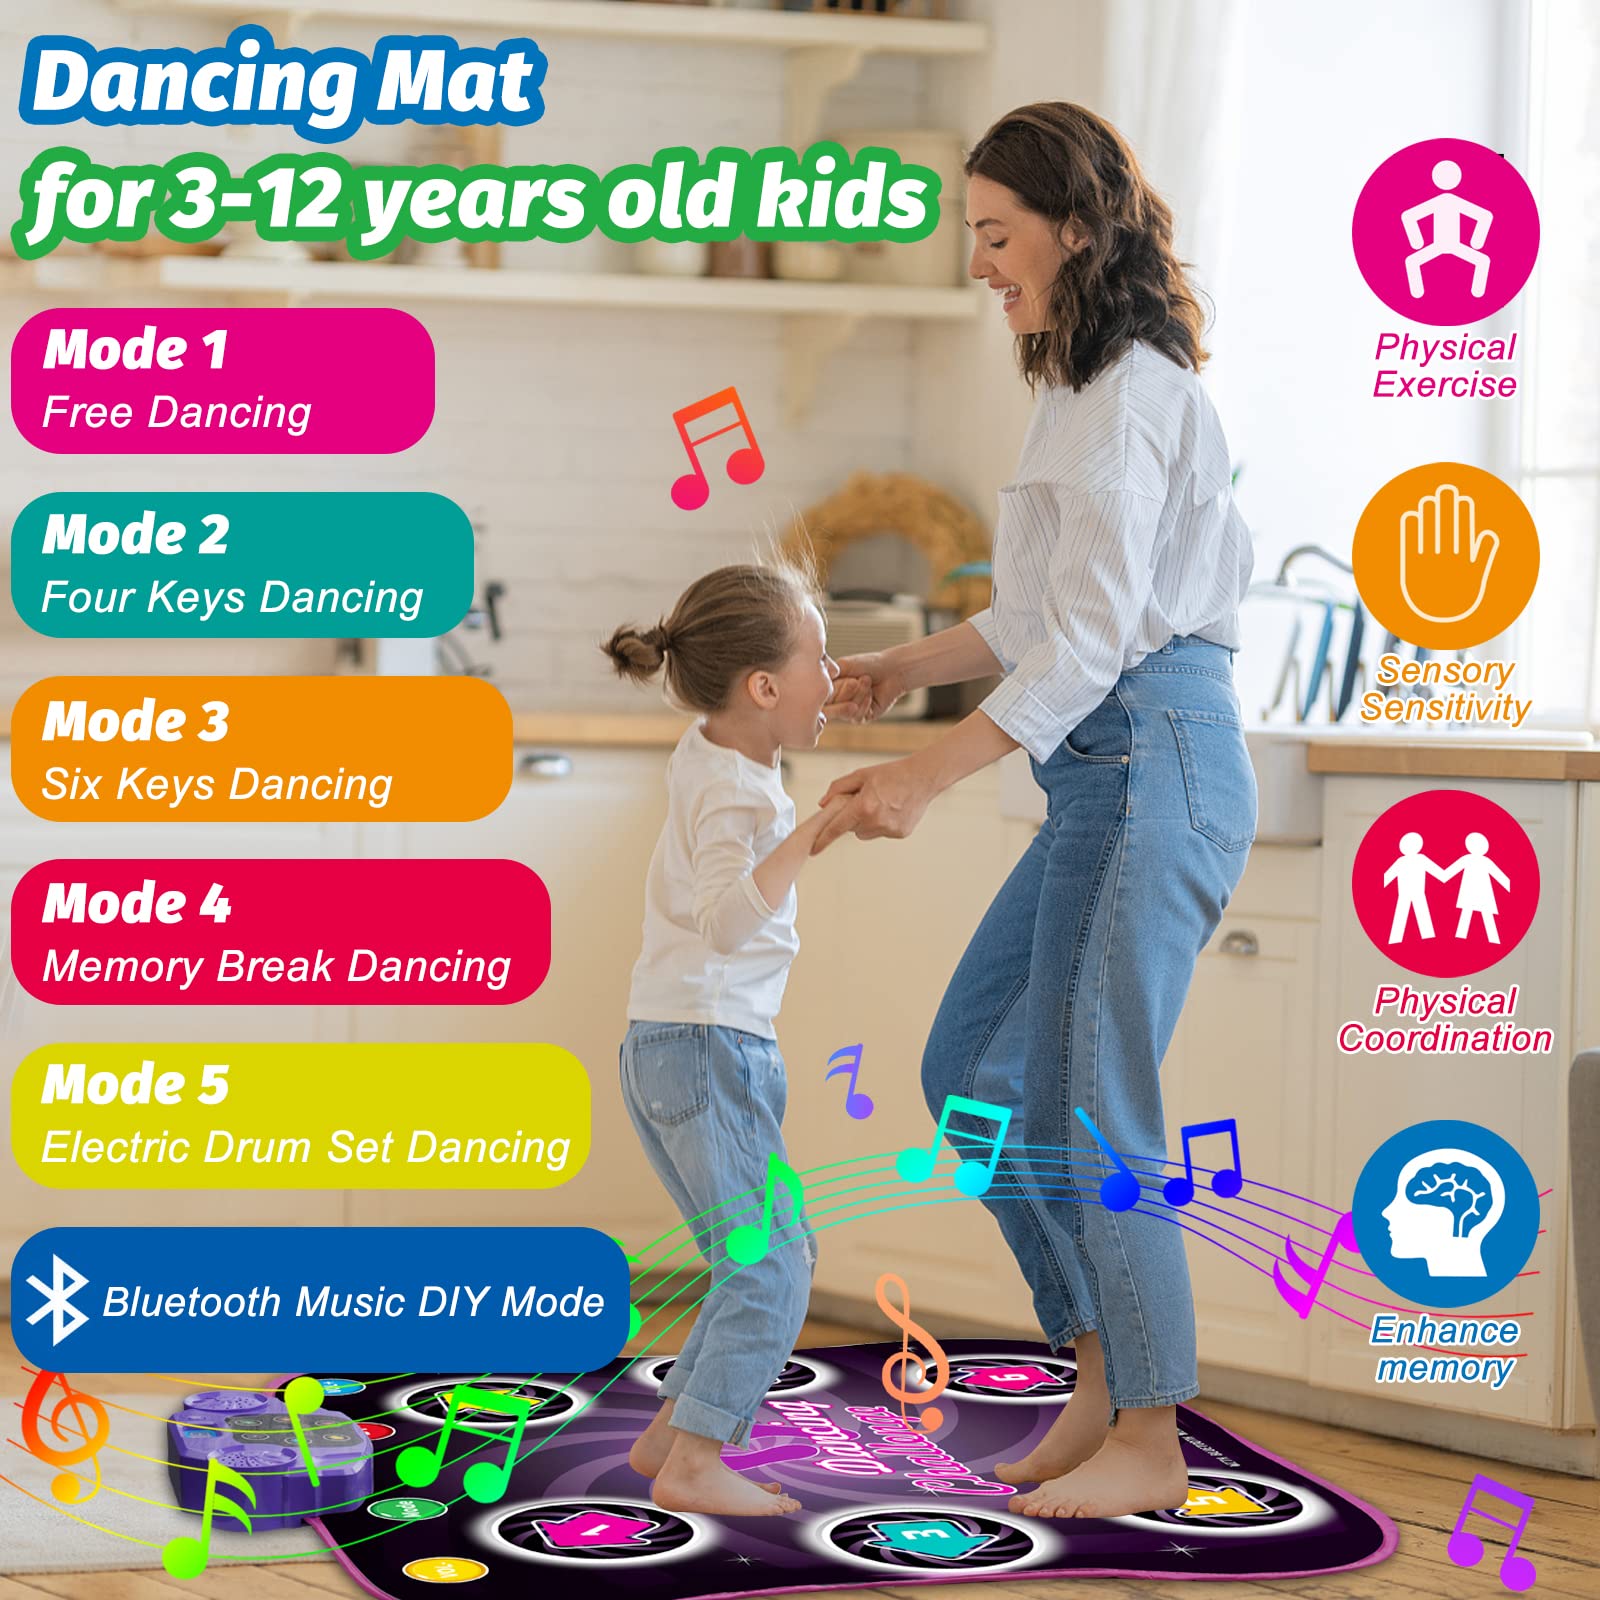 COTTEOX Dance Mat Toys with Wireless Bluetooth for 3-12 Year Old Kids, Lights Up Dance Pad with Built-in Music 6 Levels Dance Games, Gifts for 3 4 5 6 7 8 9 10 11 Year Old Girls Boys, Dual Speaker